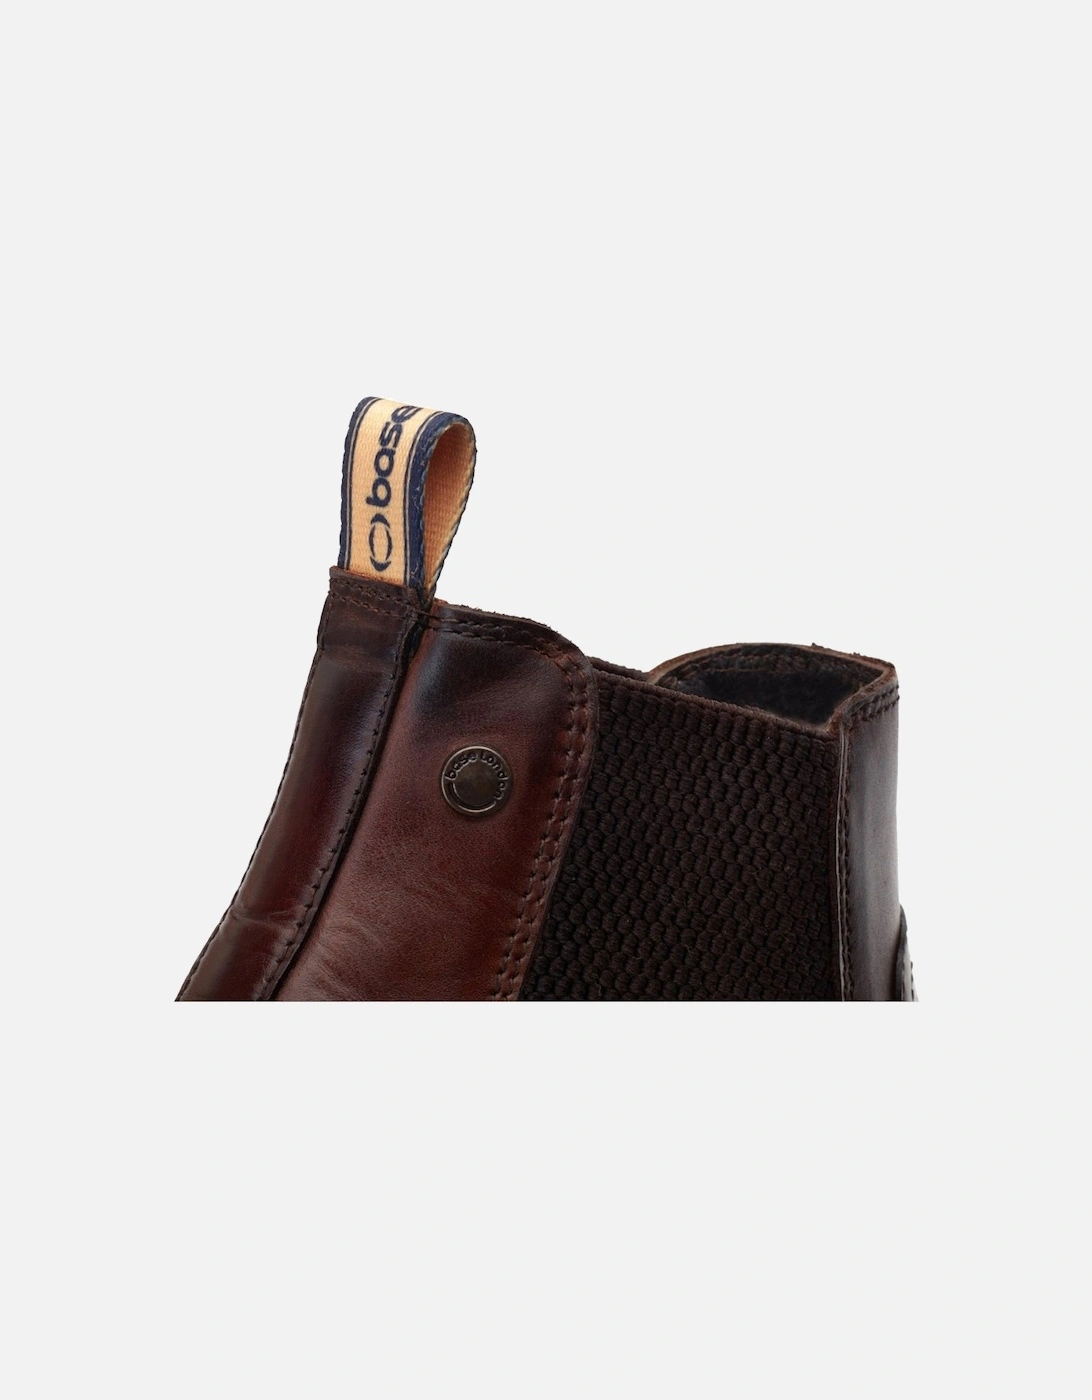 Cutler Washed Mens Chelsea Boots